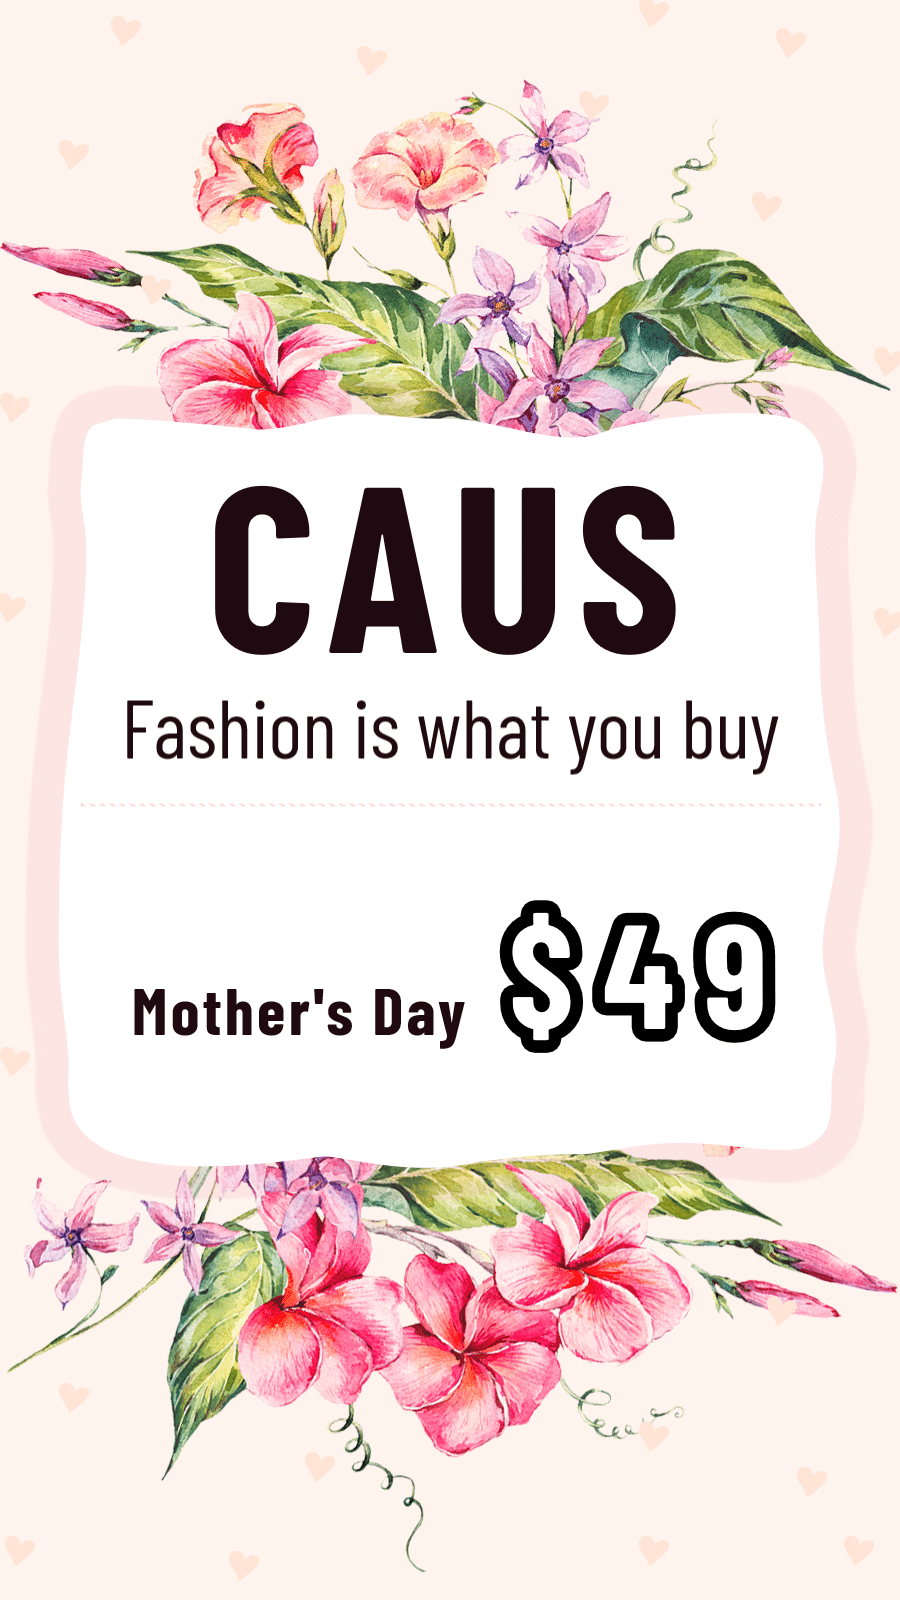 Flower Border Simple Fresh Mother's Day Clothes Promo Ecommerce Story